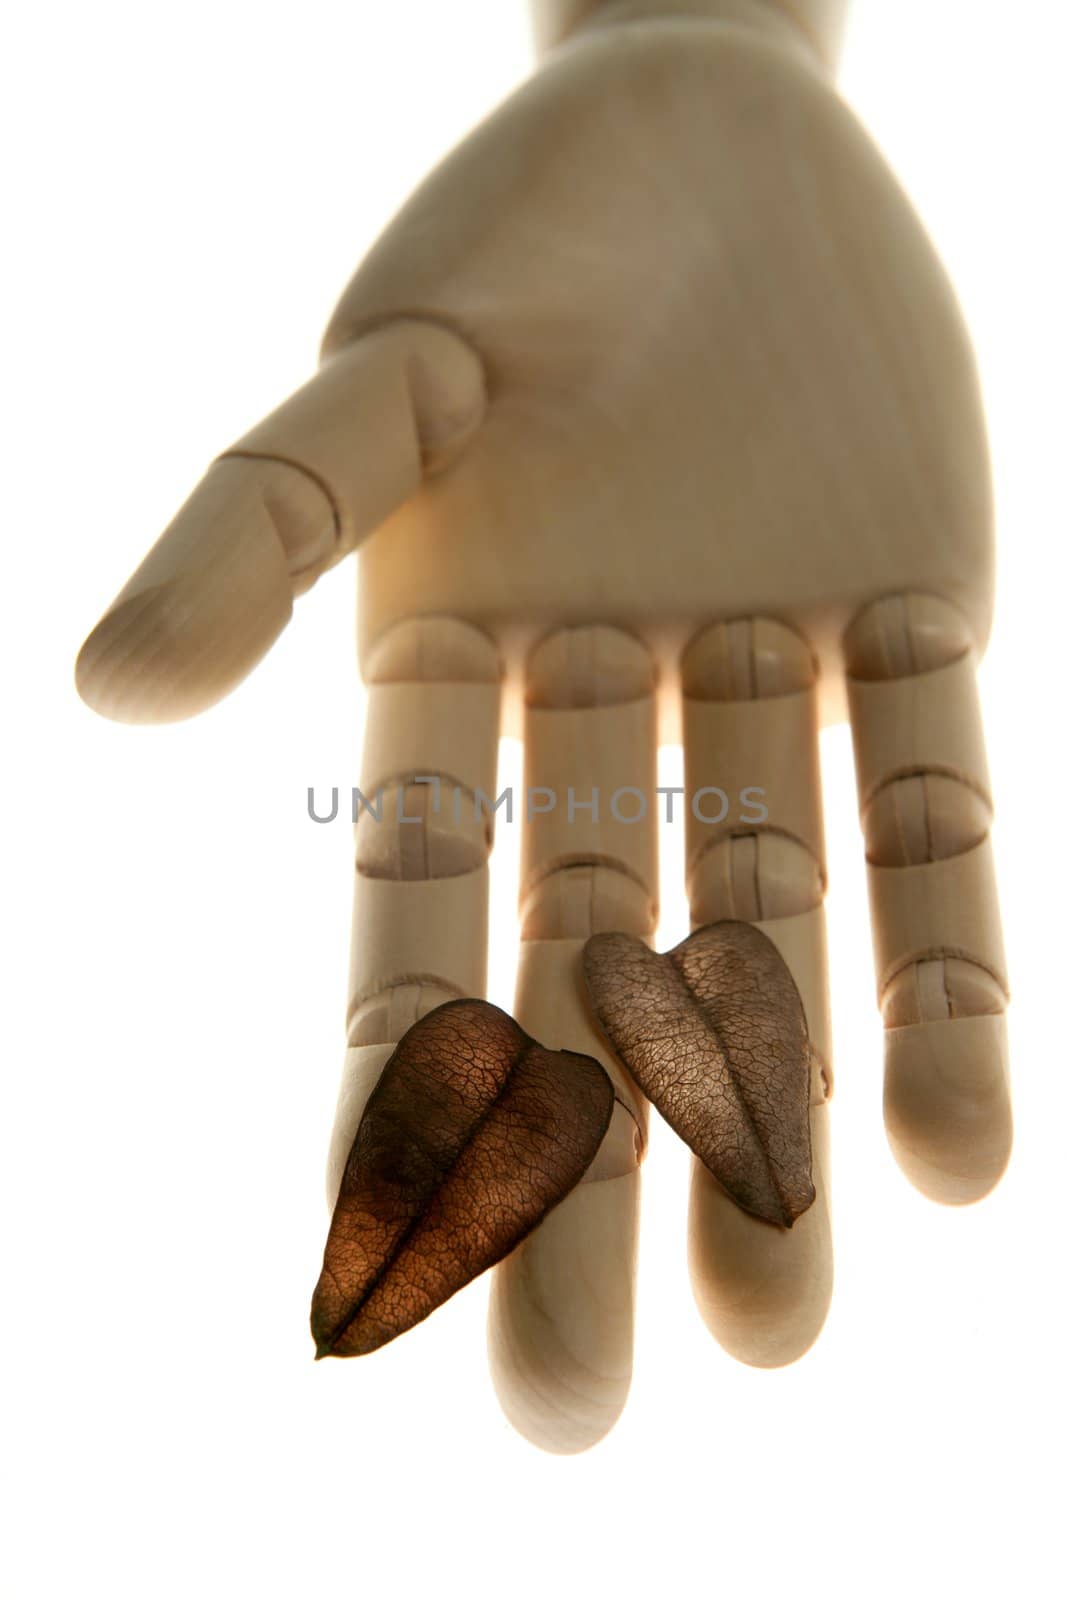 Mannequin wooden hand holding autumn brown leaves